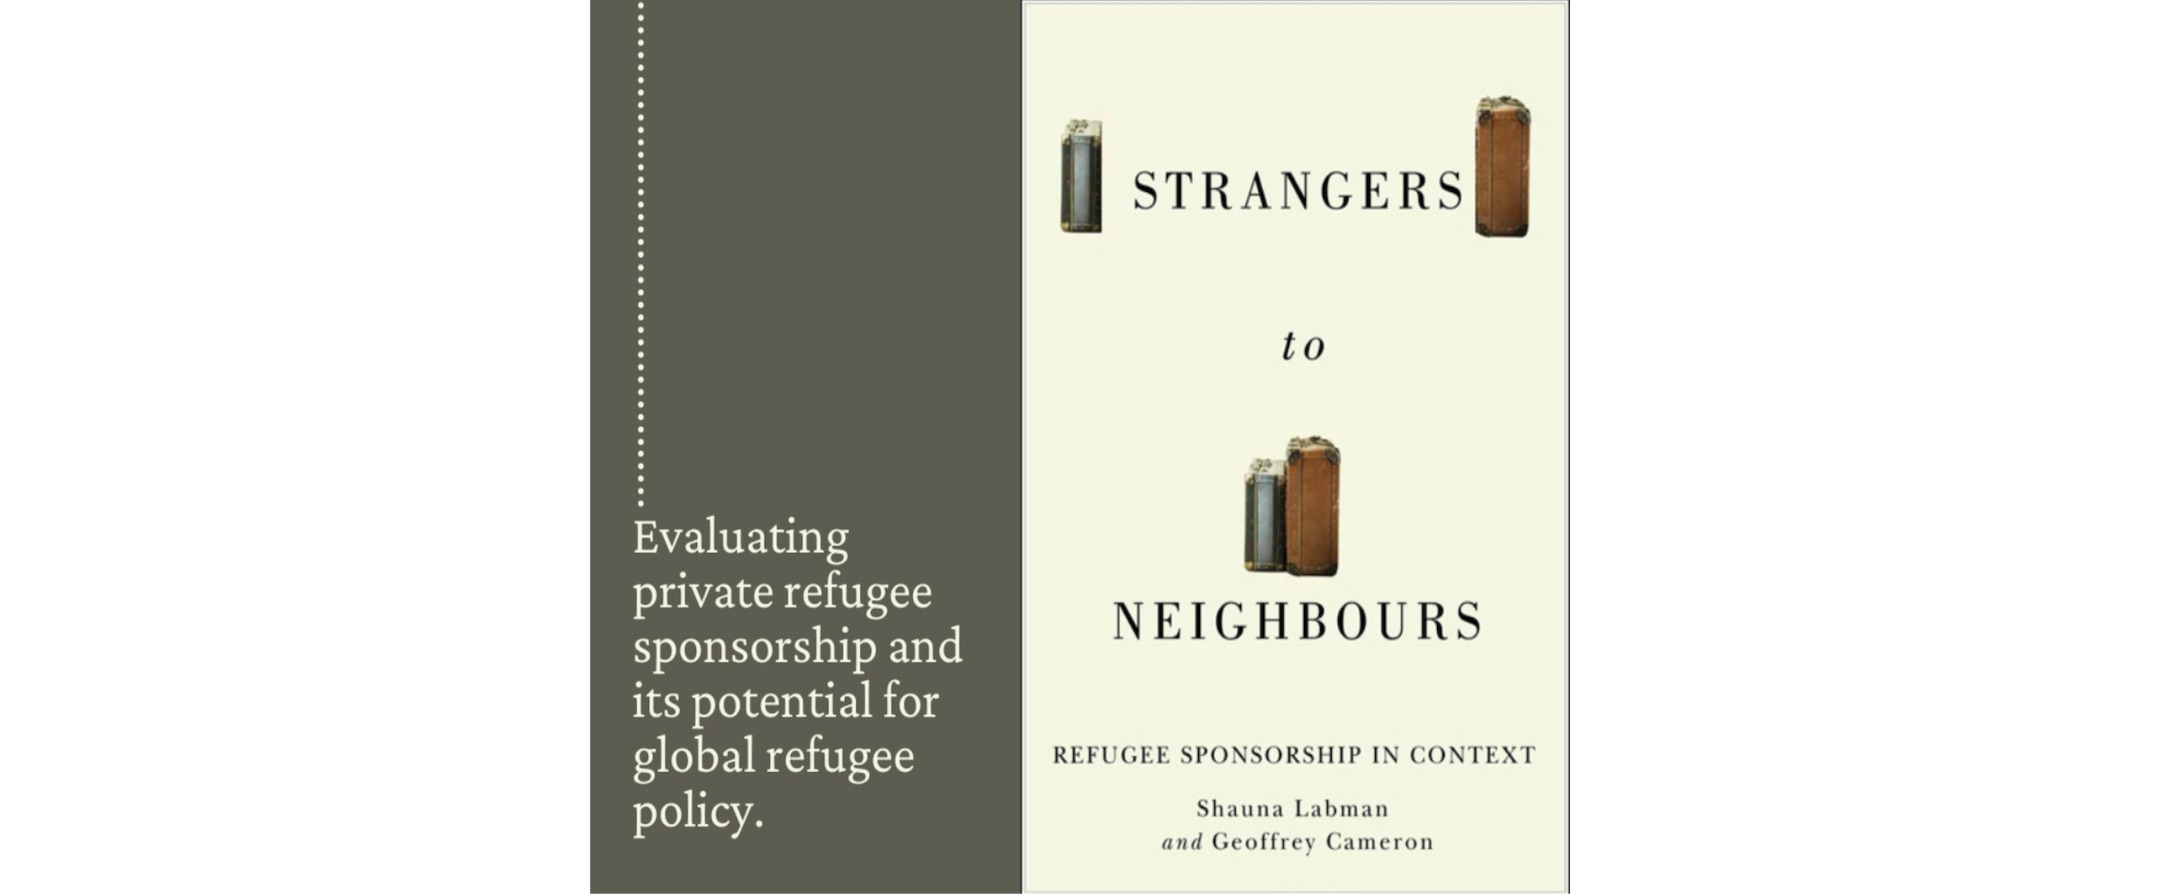 "Strangers to Neighbours" book cover